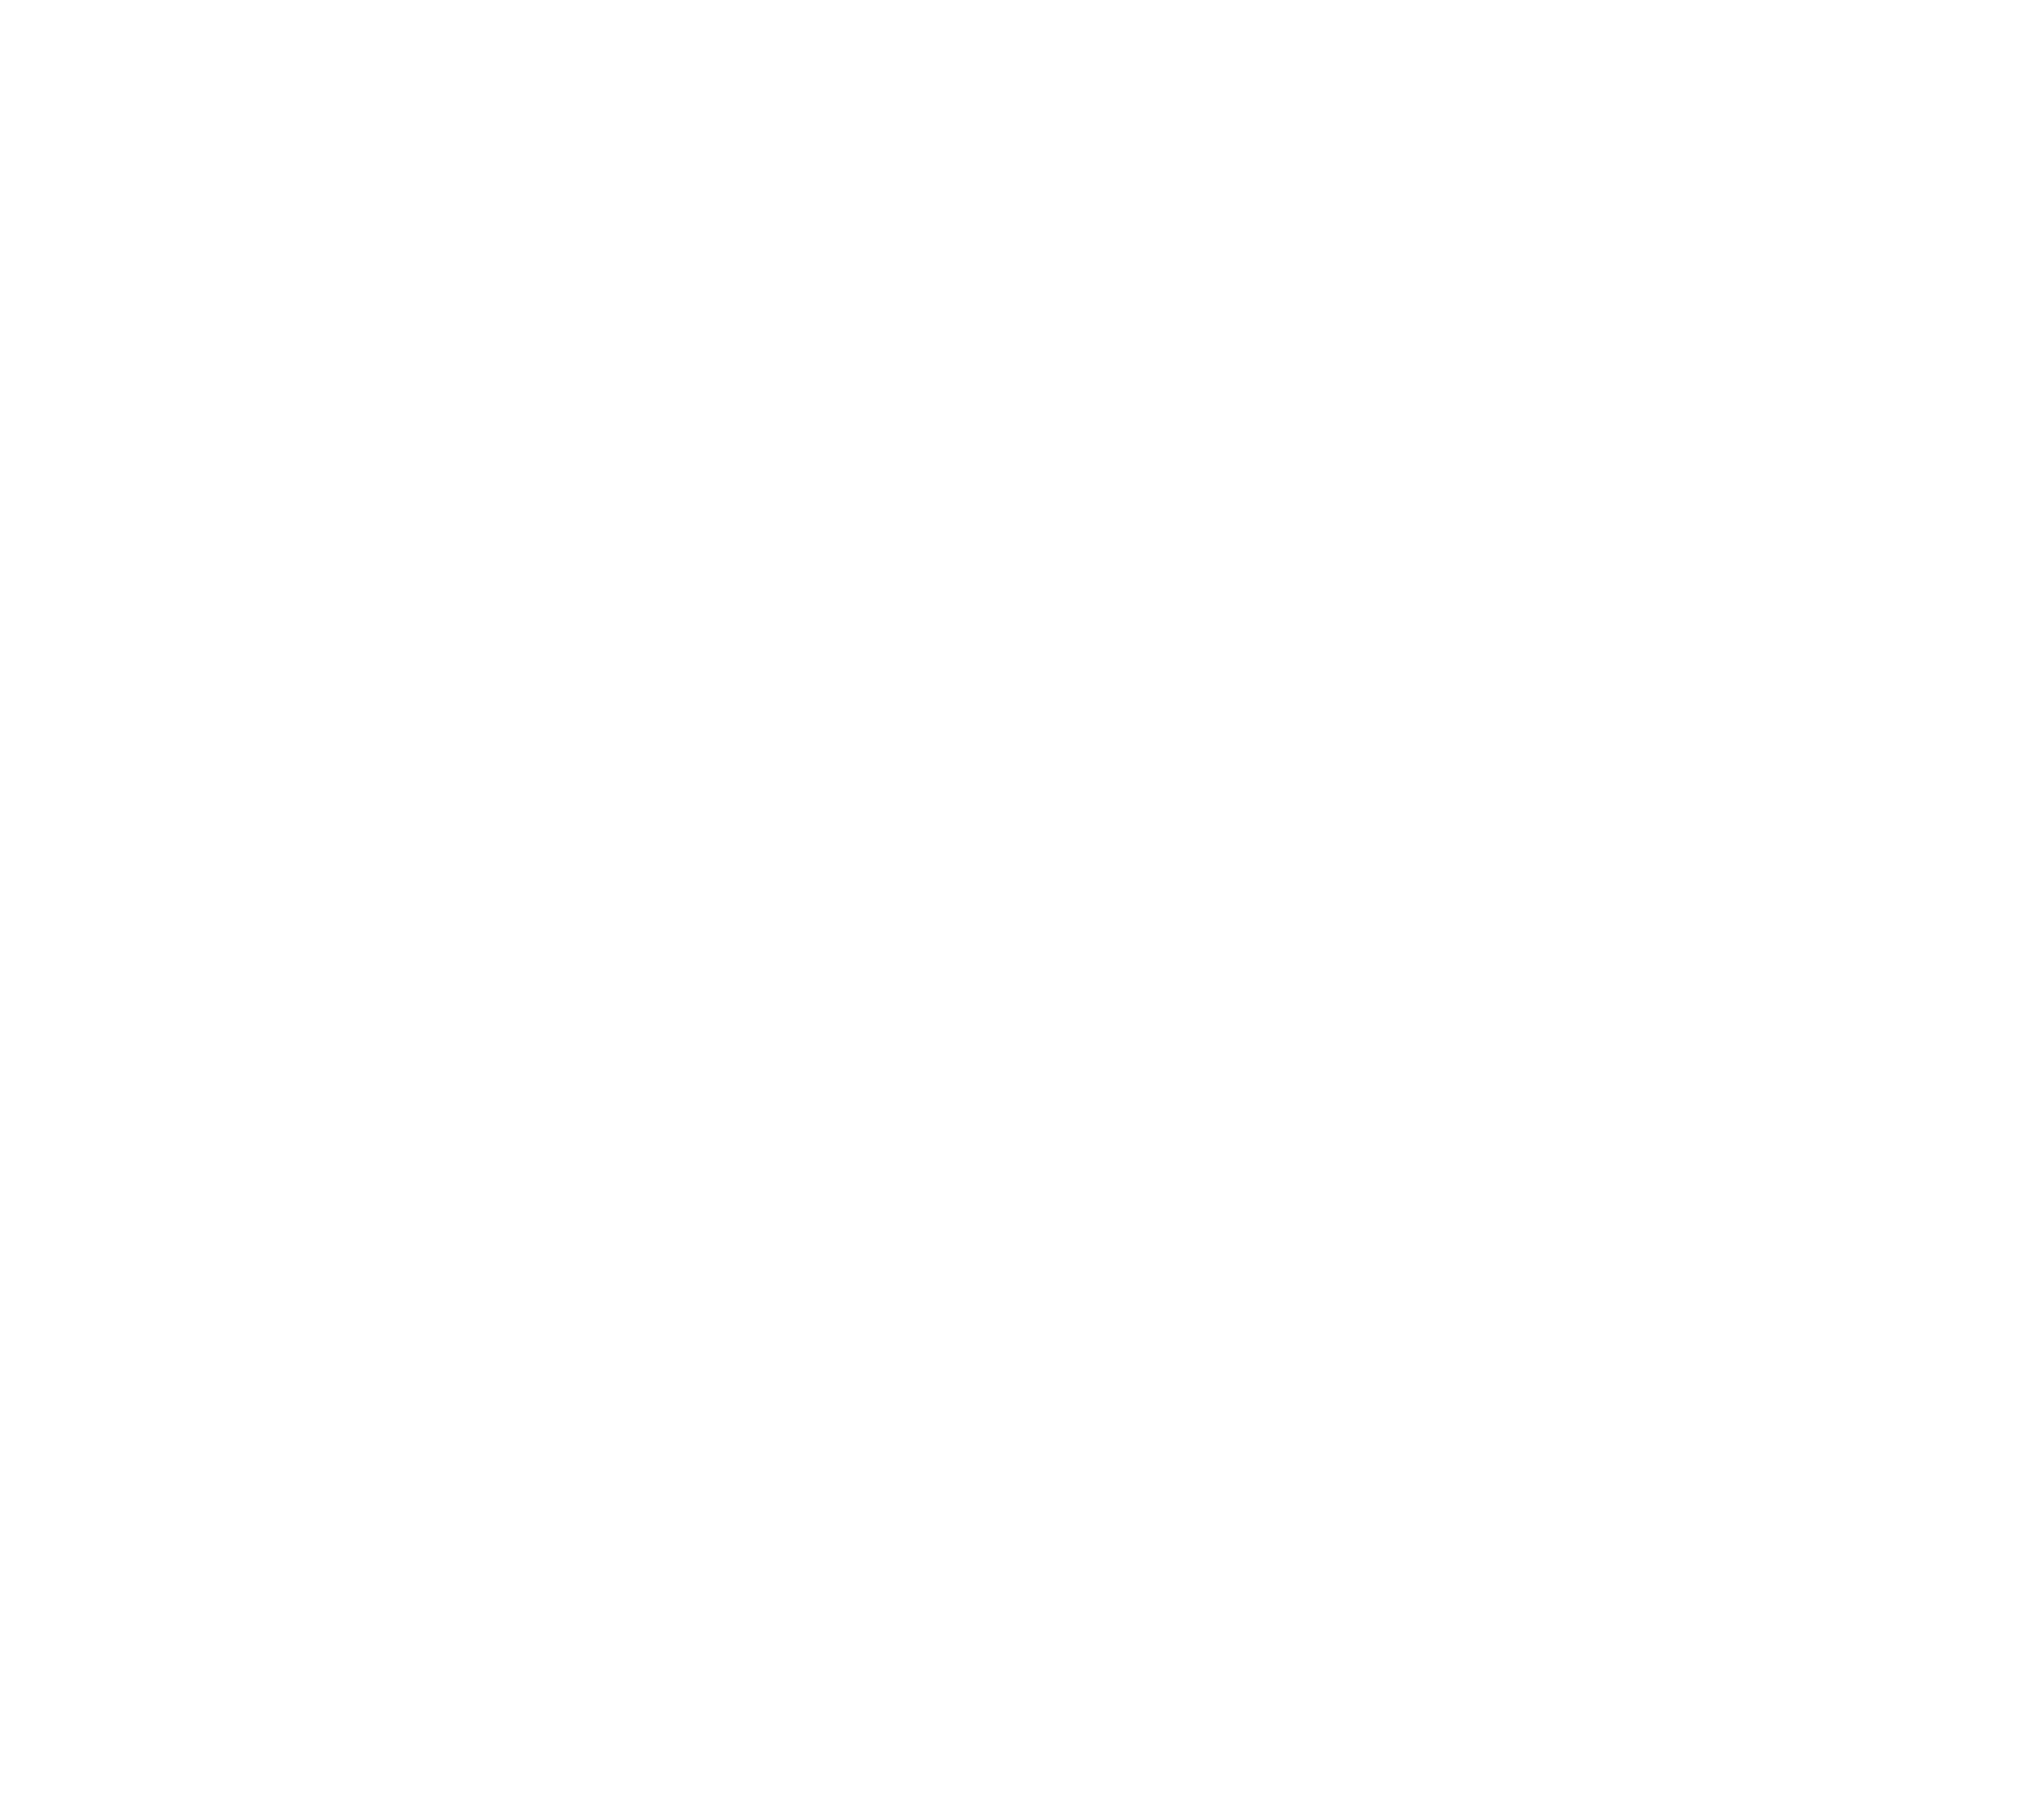 Lily Loves…